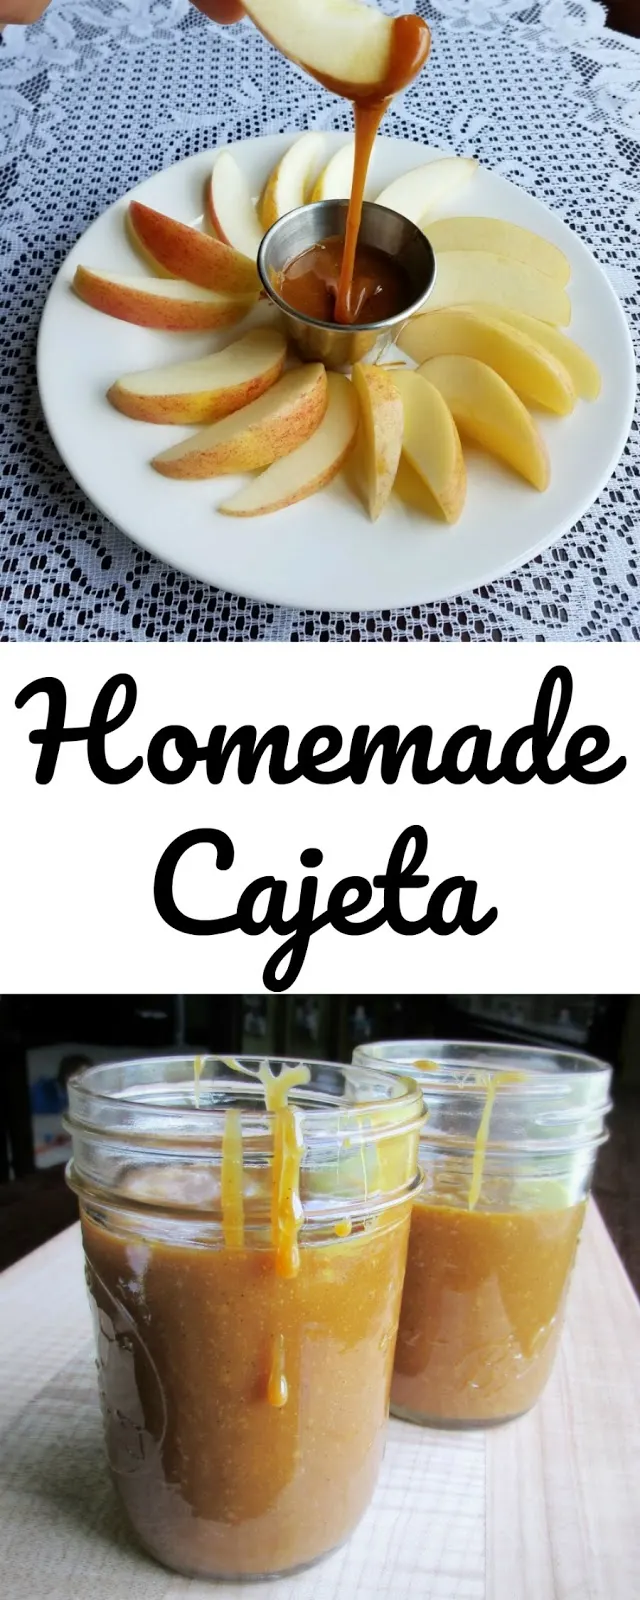 This Cajeta is liquid gold. It is thick, sweet and caramely. It is great over ice cream, pound cake, as a dip for apples or on a spoon! It is made with goat’s milk for the full flavor, but this recipe could be easily made with cow’s milk as well!